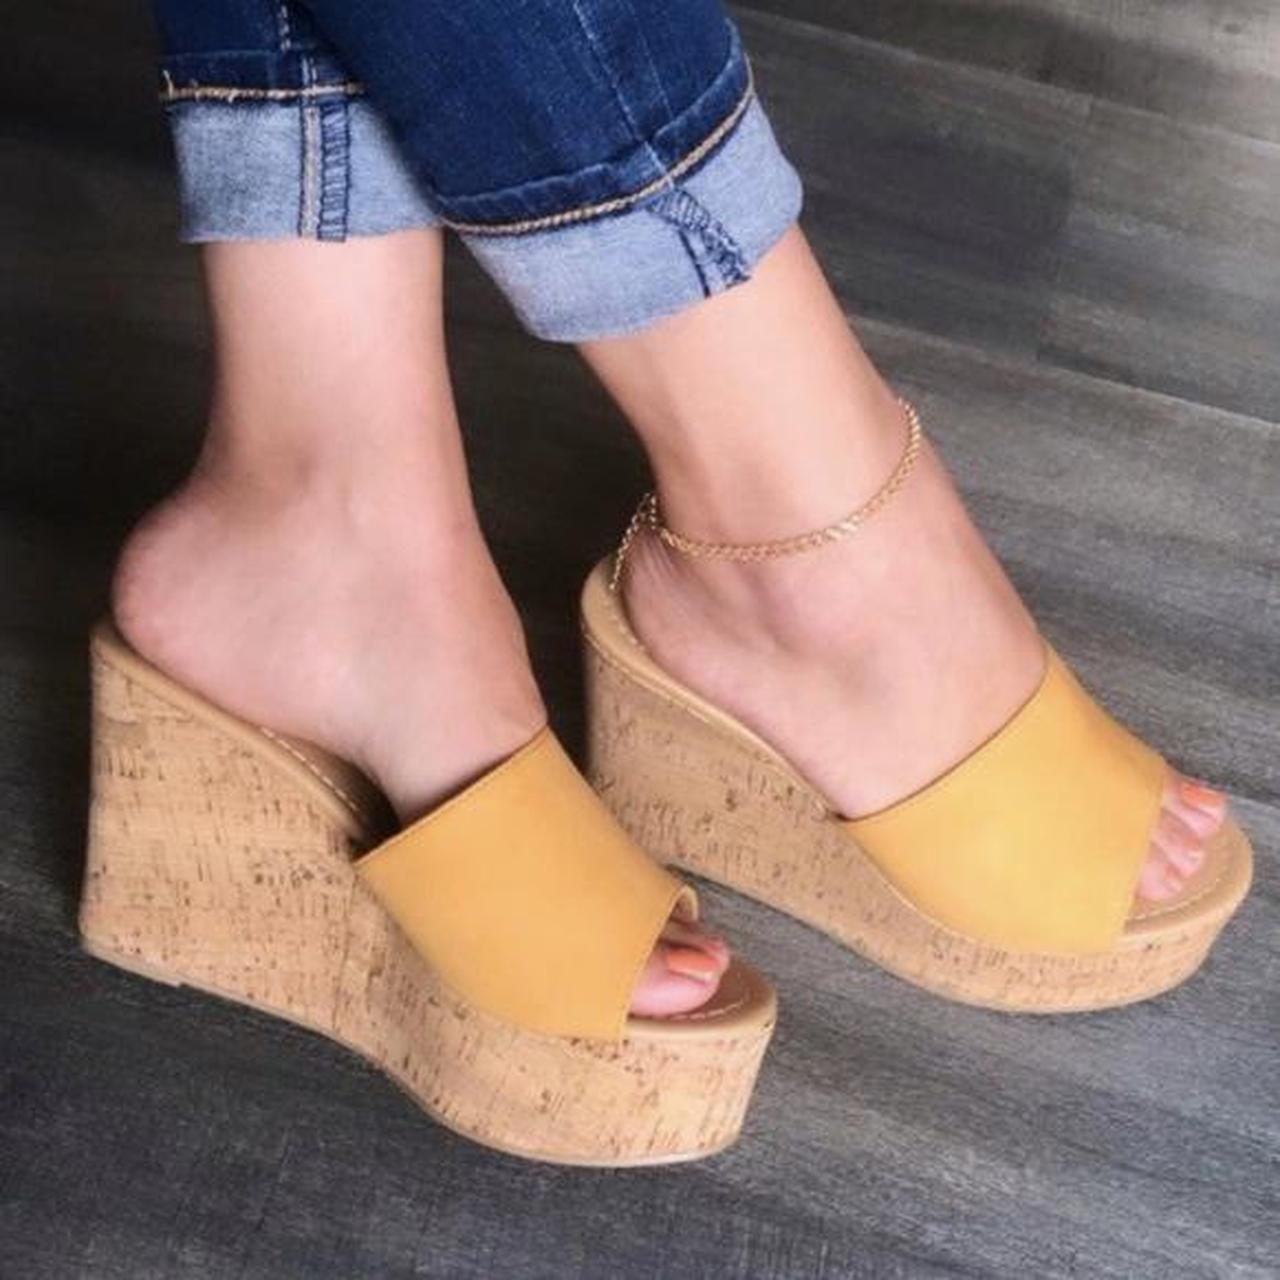 Product Image 2 - 🦋🦋SALE🦋🦋

Brand new yellow wedges! Perfect